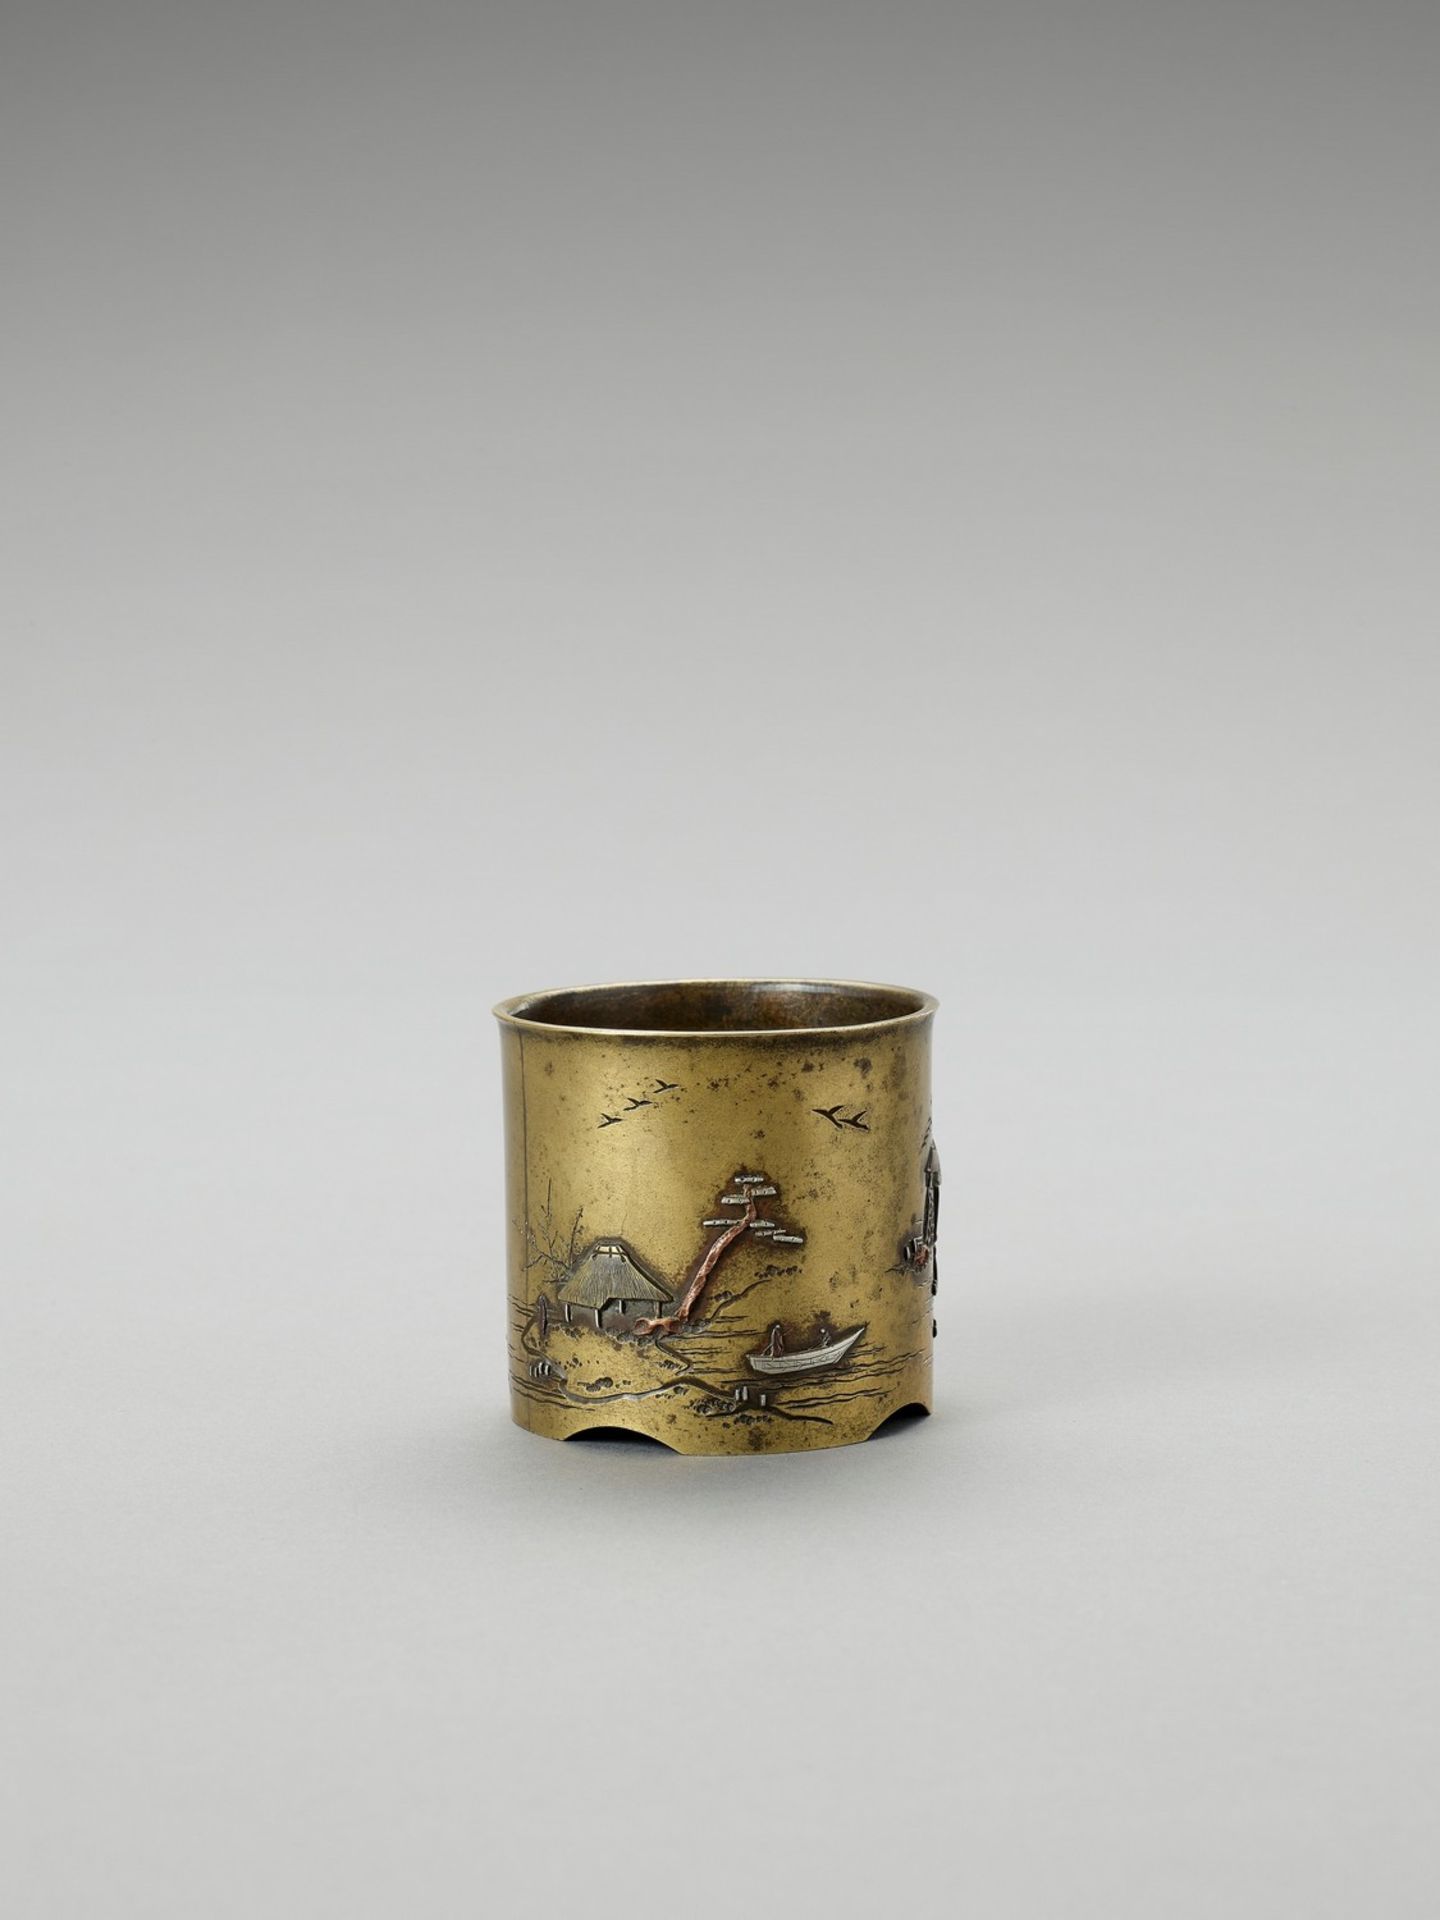 A SMALL SENTOKU VESSEL WITH SILVER AND COPPER INLAYS - Image 3 of 5